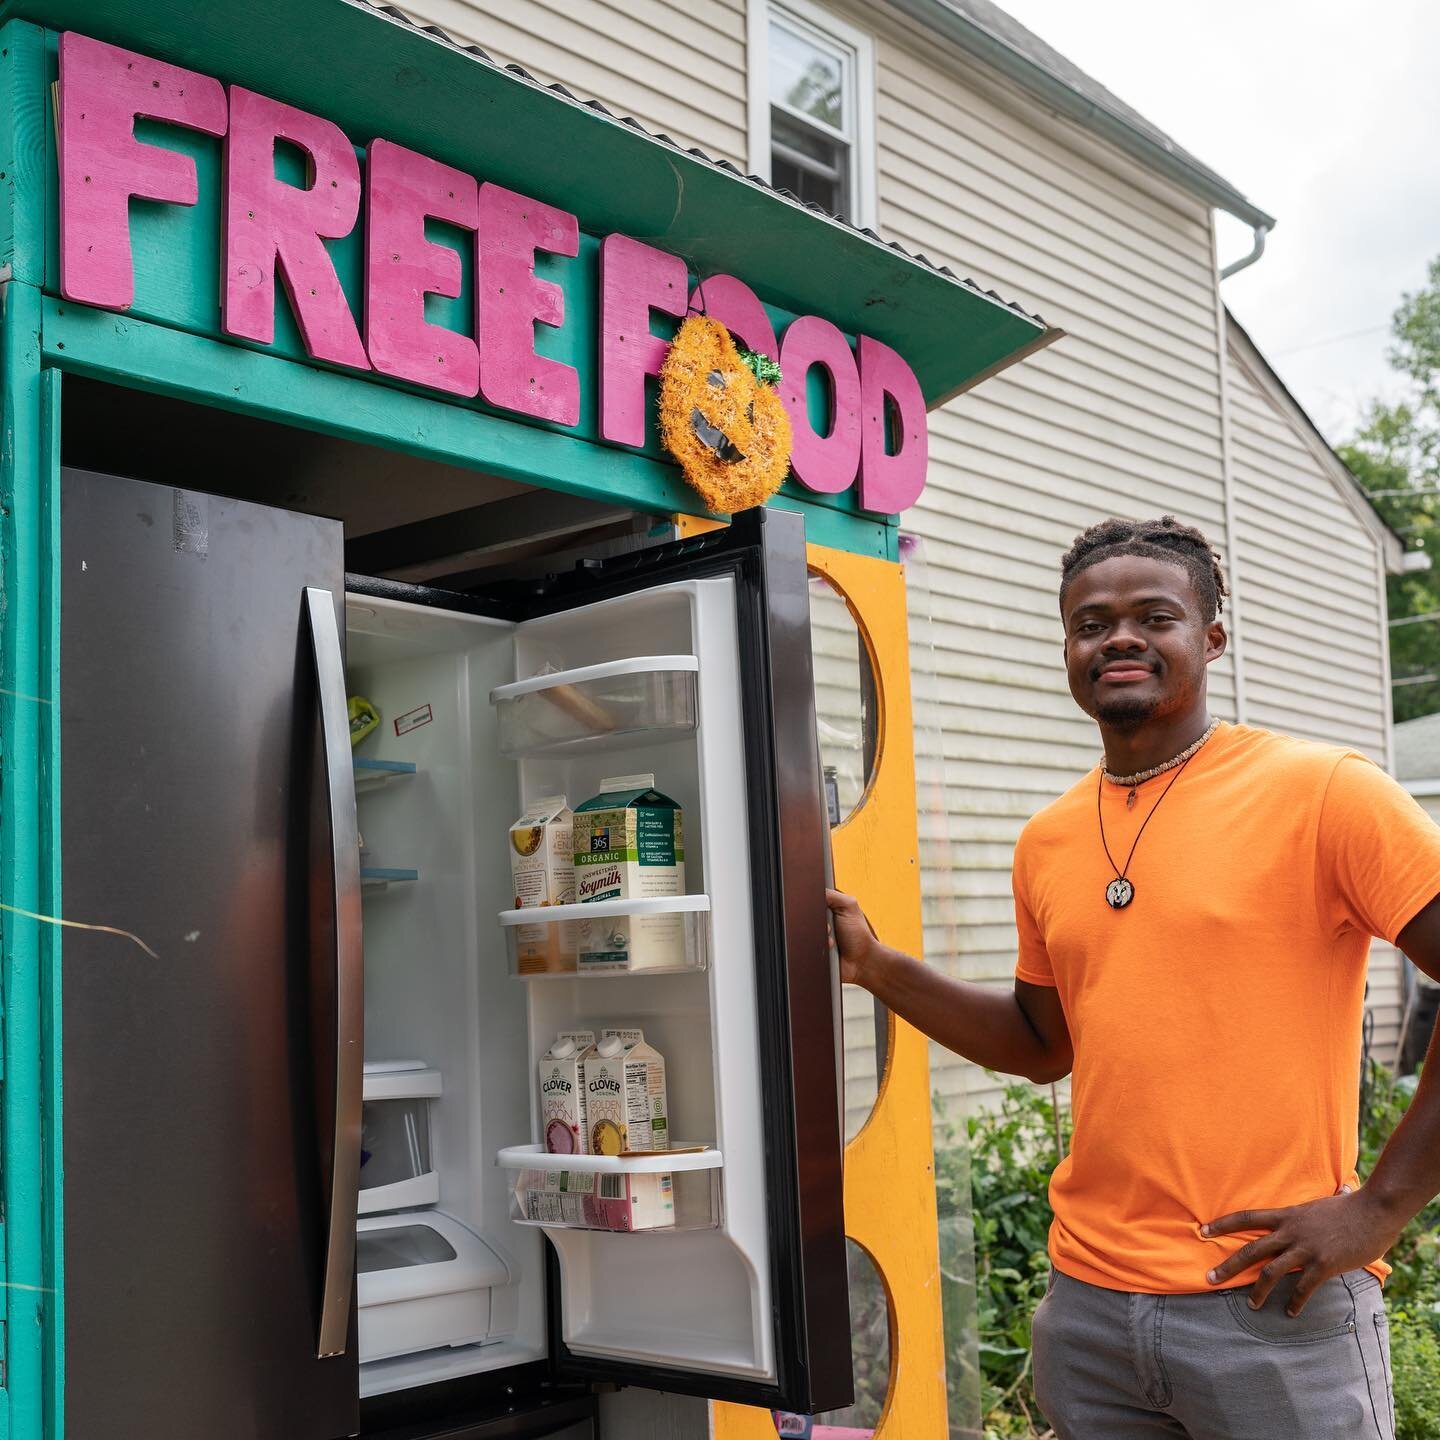 We&rsquo;re excited to introduce Chicago's first solar-powered community fridge! In partnership with @nicole_taryn of @gettinggrowncollective and @keyante_h of Sunbend Solar! Watch the introduction to this revolutionary fridge as they and Love Fridge